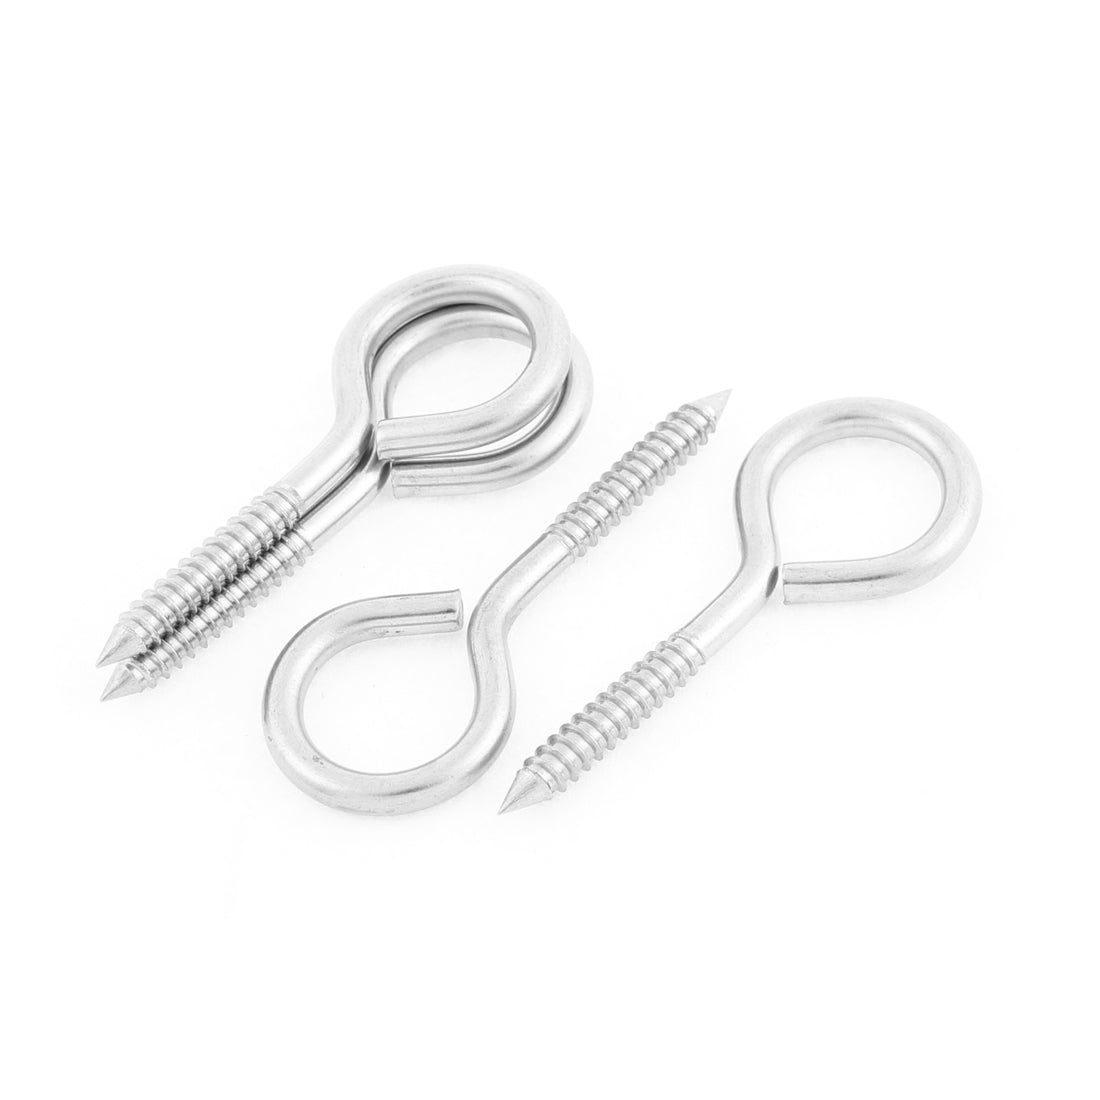 uxcell Uxcell M4x50mm 304 Stainless Steel Screw Eye Pins 4pcs for Jewelry Findings